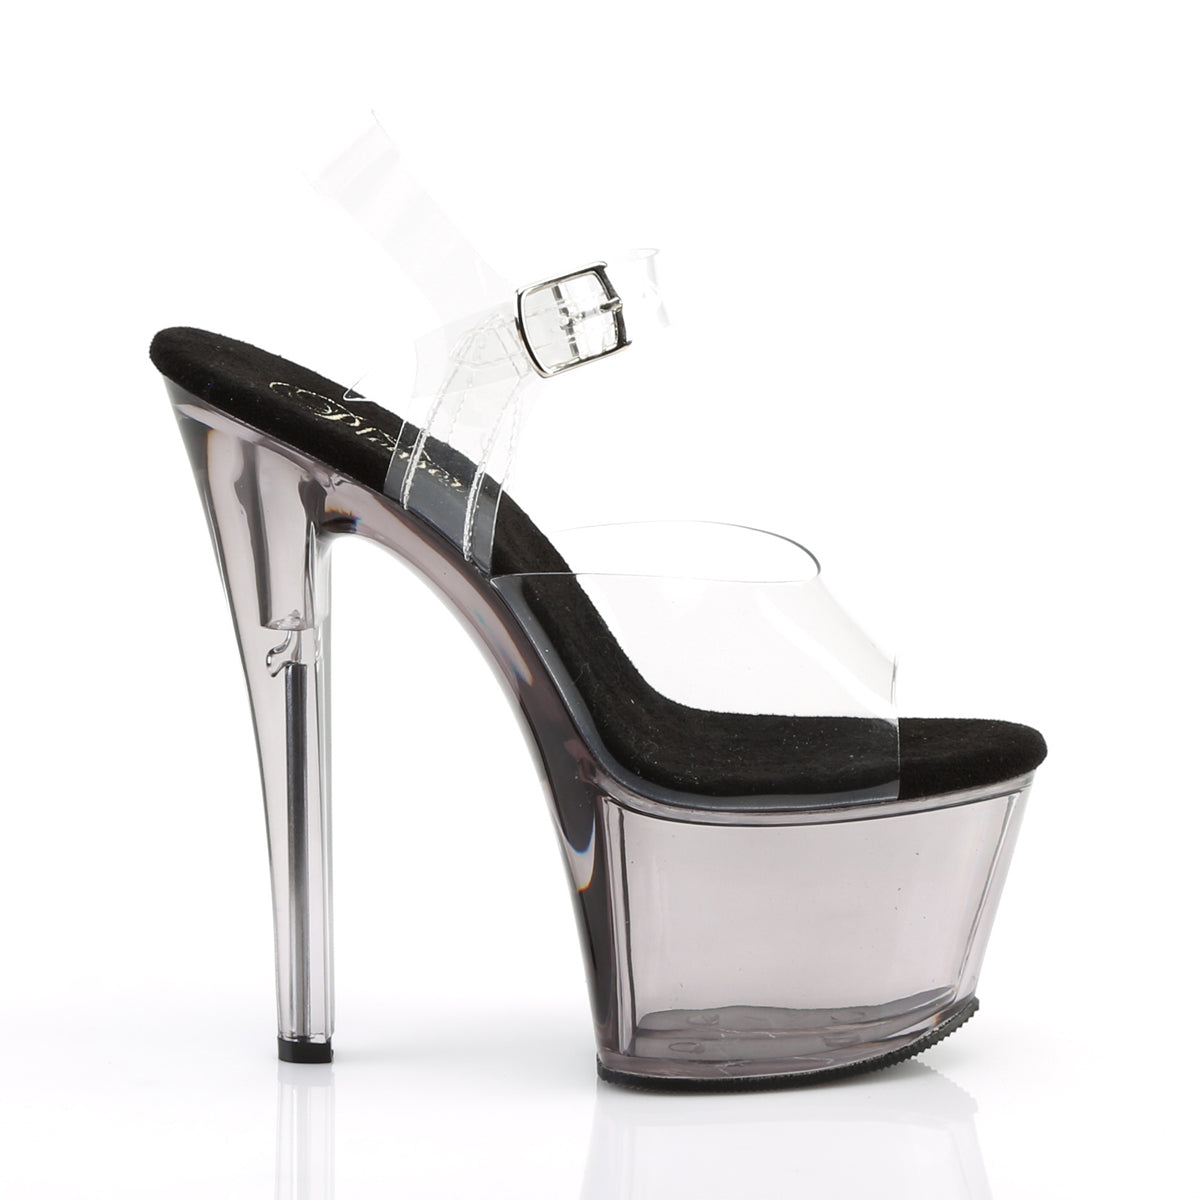 SKY-308T 7" Heel Clear Smoke Tinted Pole Dancer Platforms-Pleaser- Sexy Shoes Fetish Heels